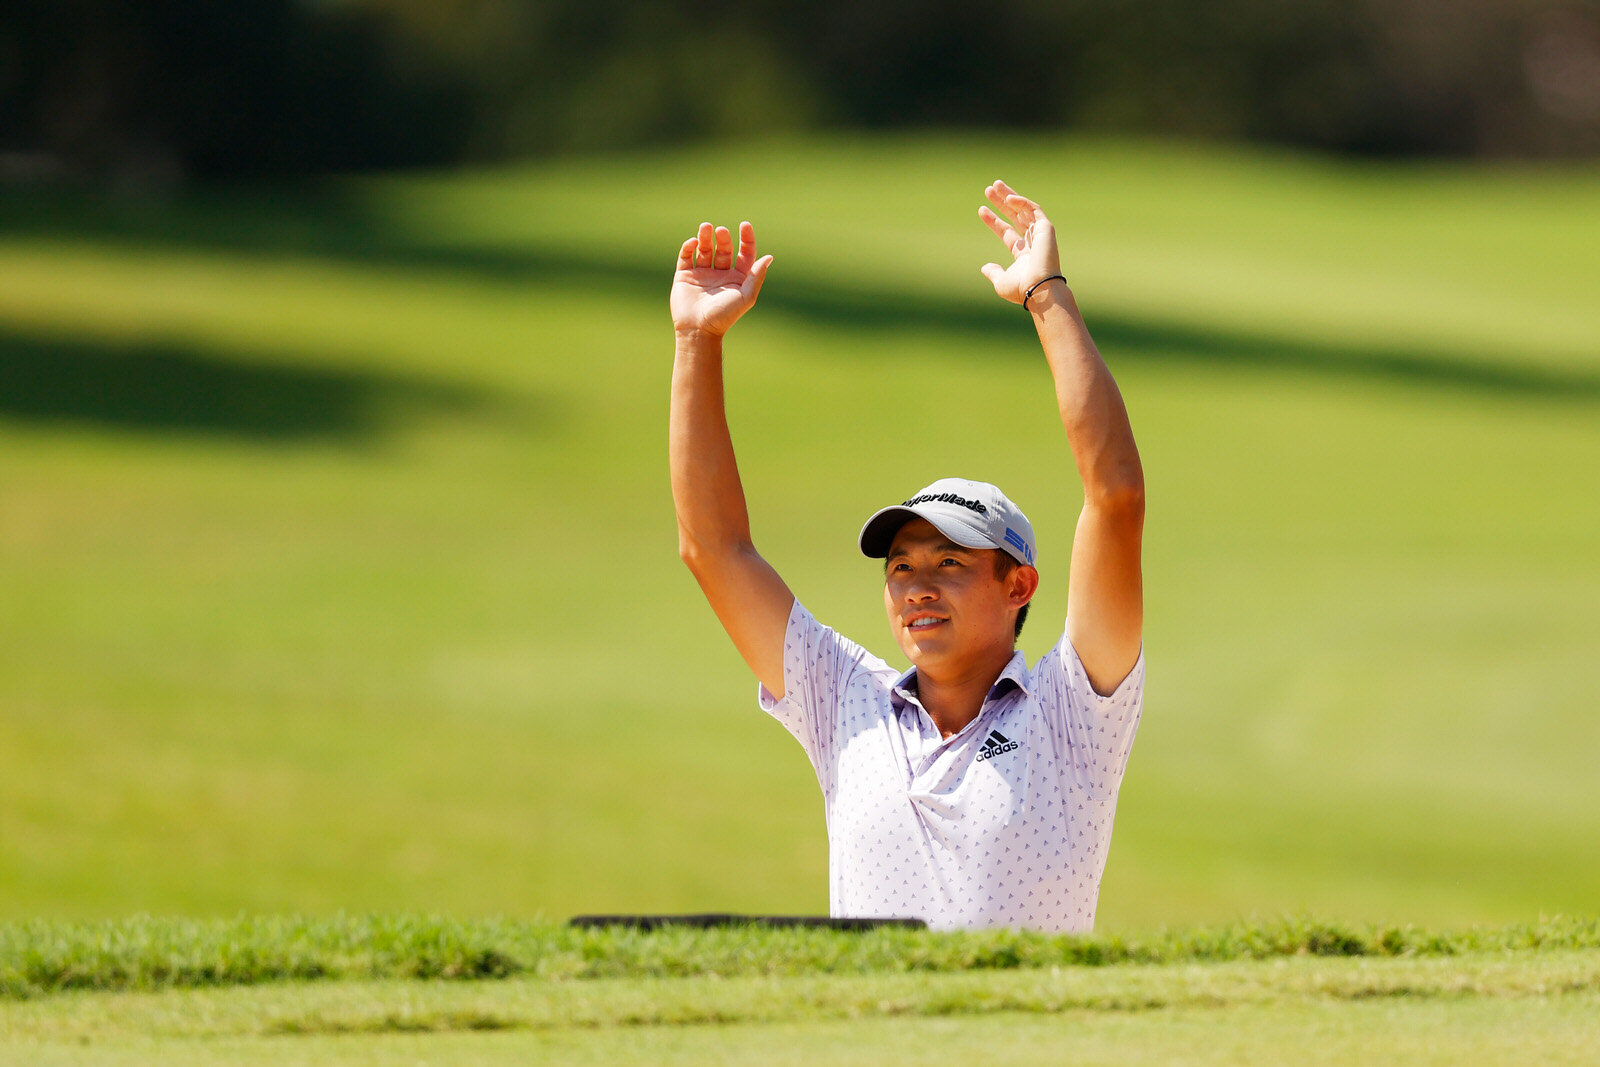  ATLANTA, GEORGIA - SEPTEMBER 06: Collin Morikawa of the United States reacts after holing out from a bunker on the first hole during the third round of the TOUR Championship at East Lake Golf Club on September 06, 2020 in Atlanta, Georgia. (Photo by